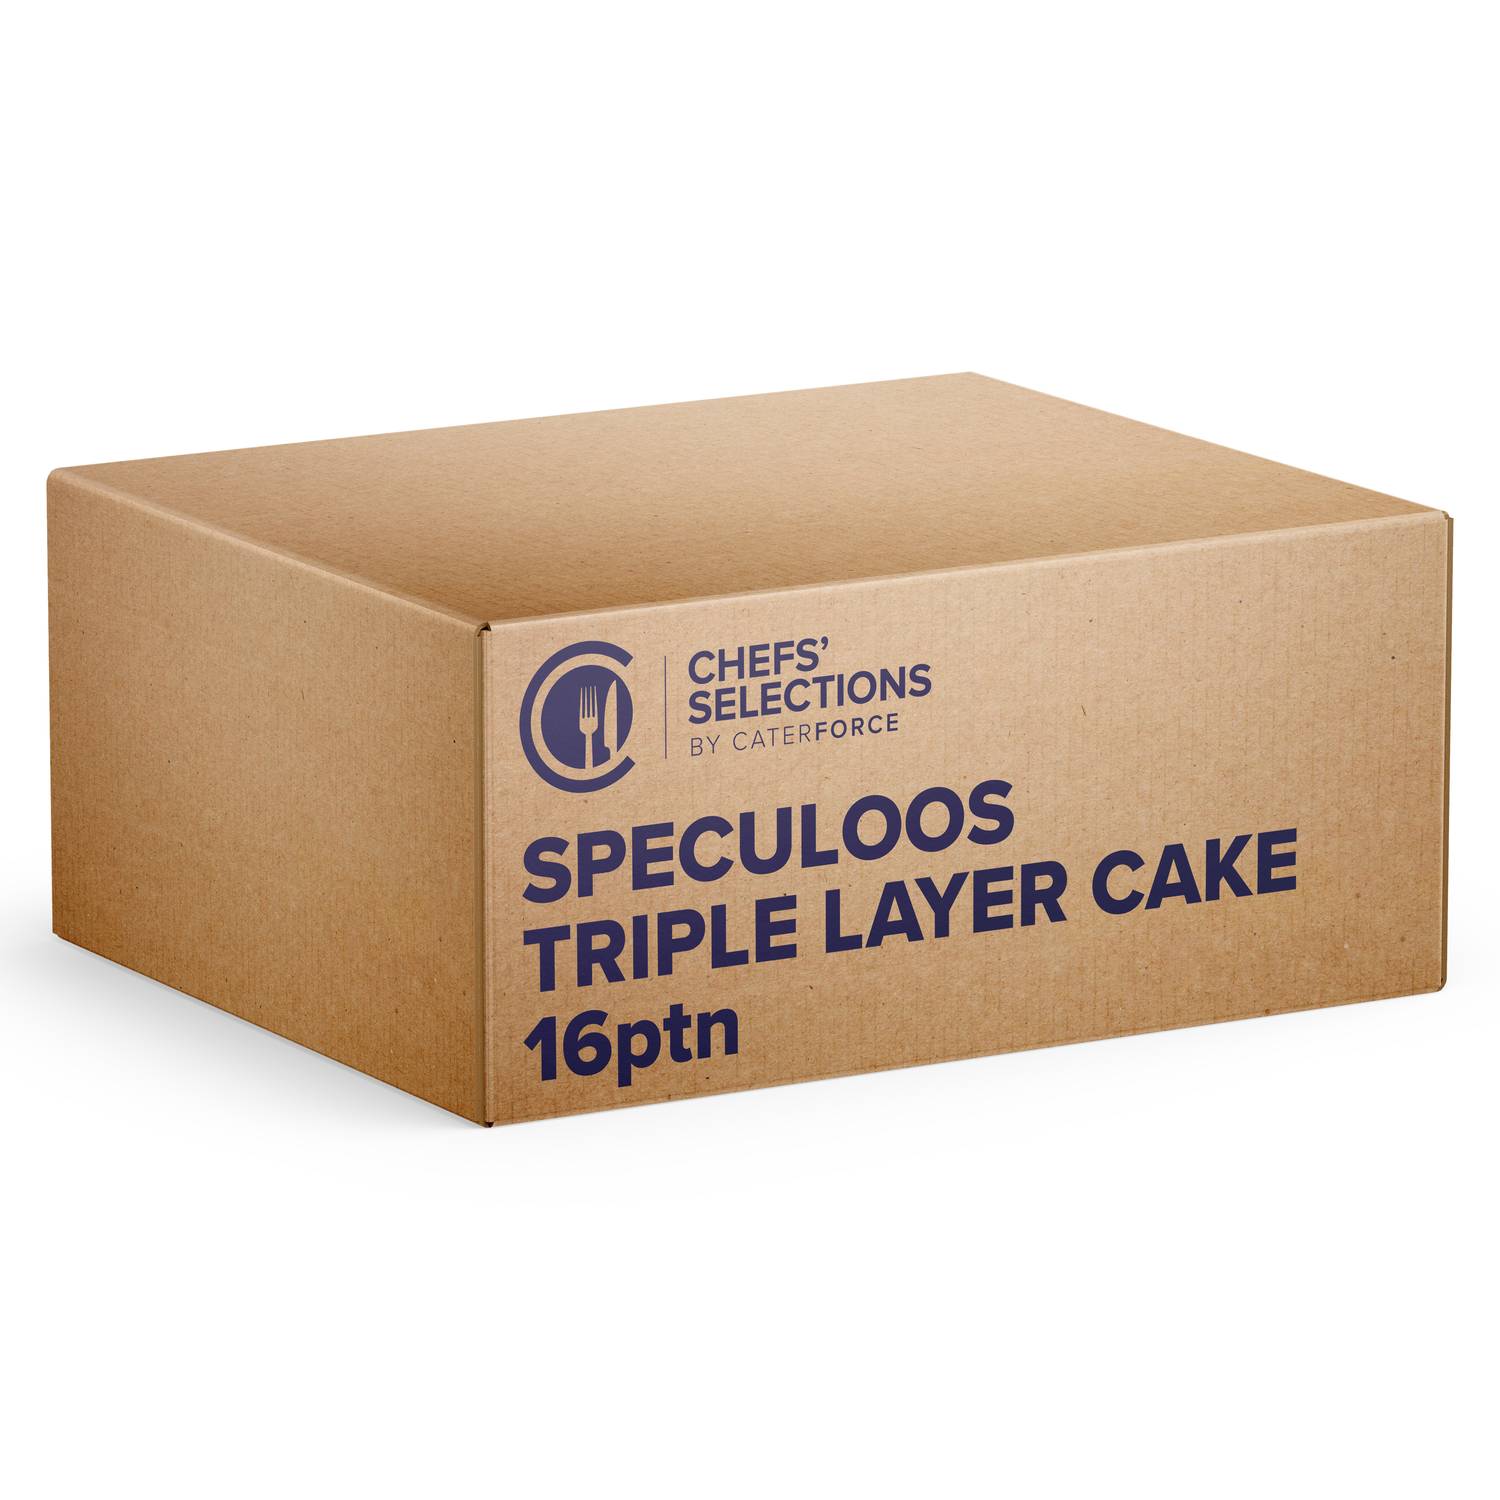 Chefs’ Selections Speculoos Triple Layer Cake (1 x 16p/ptn)